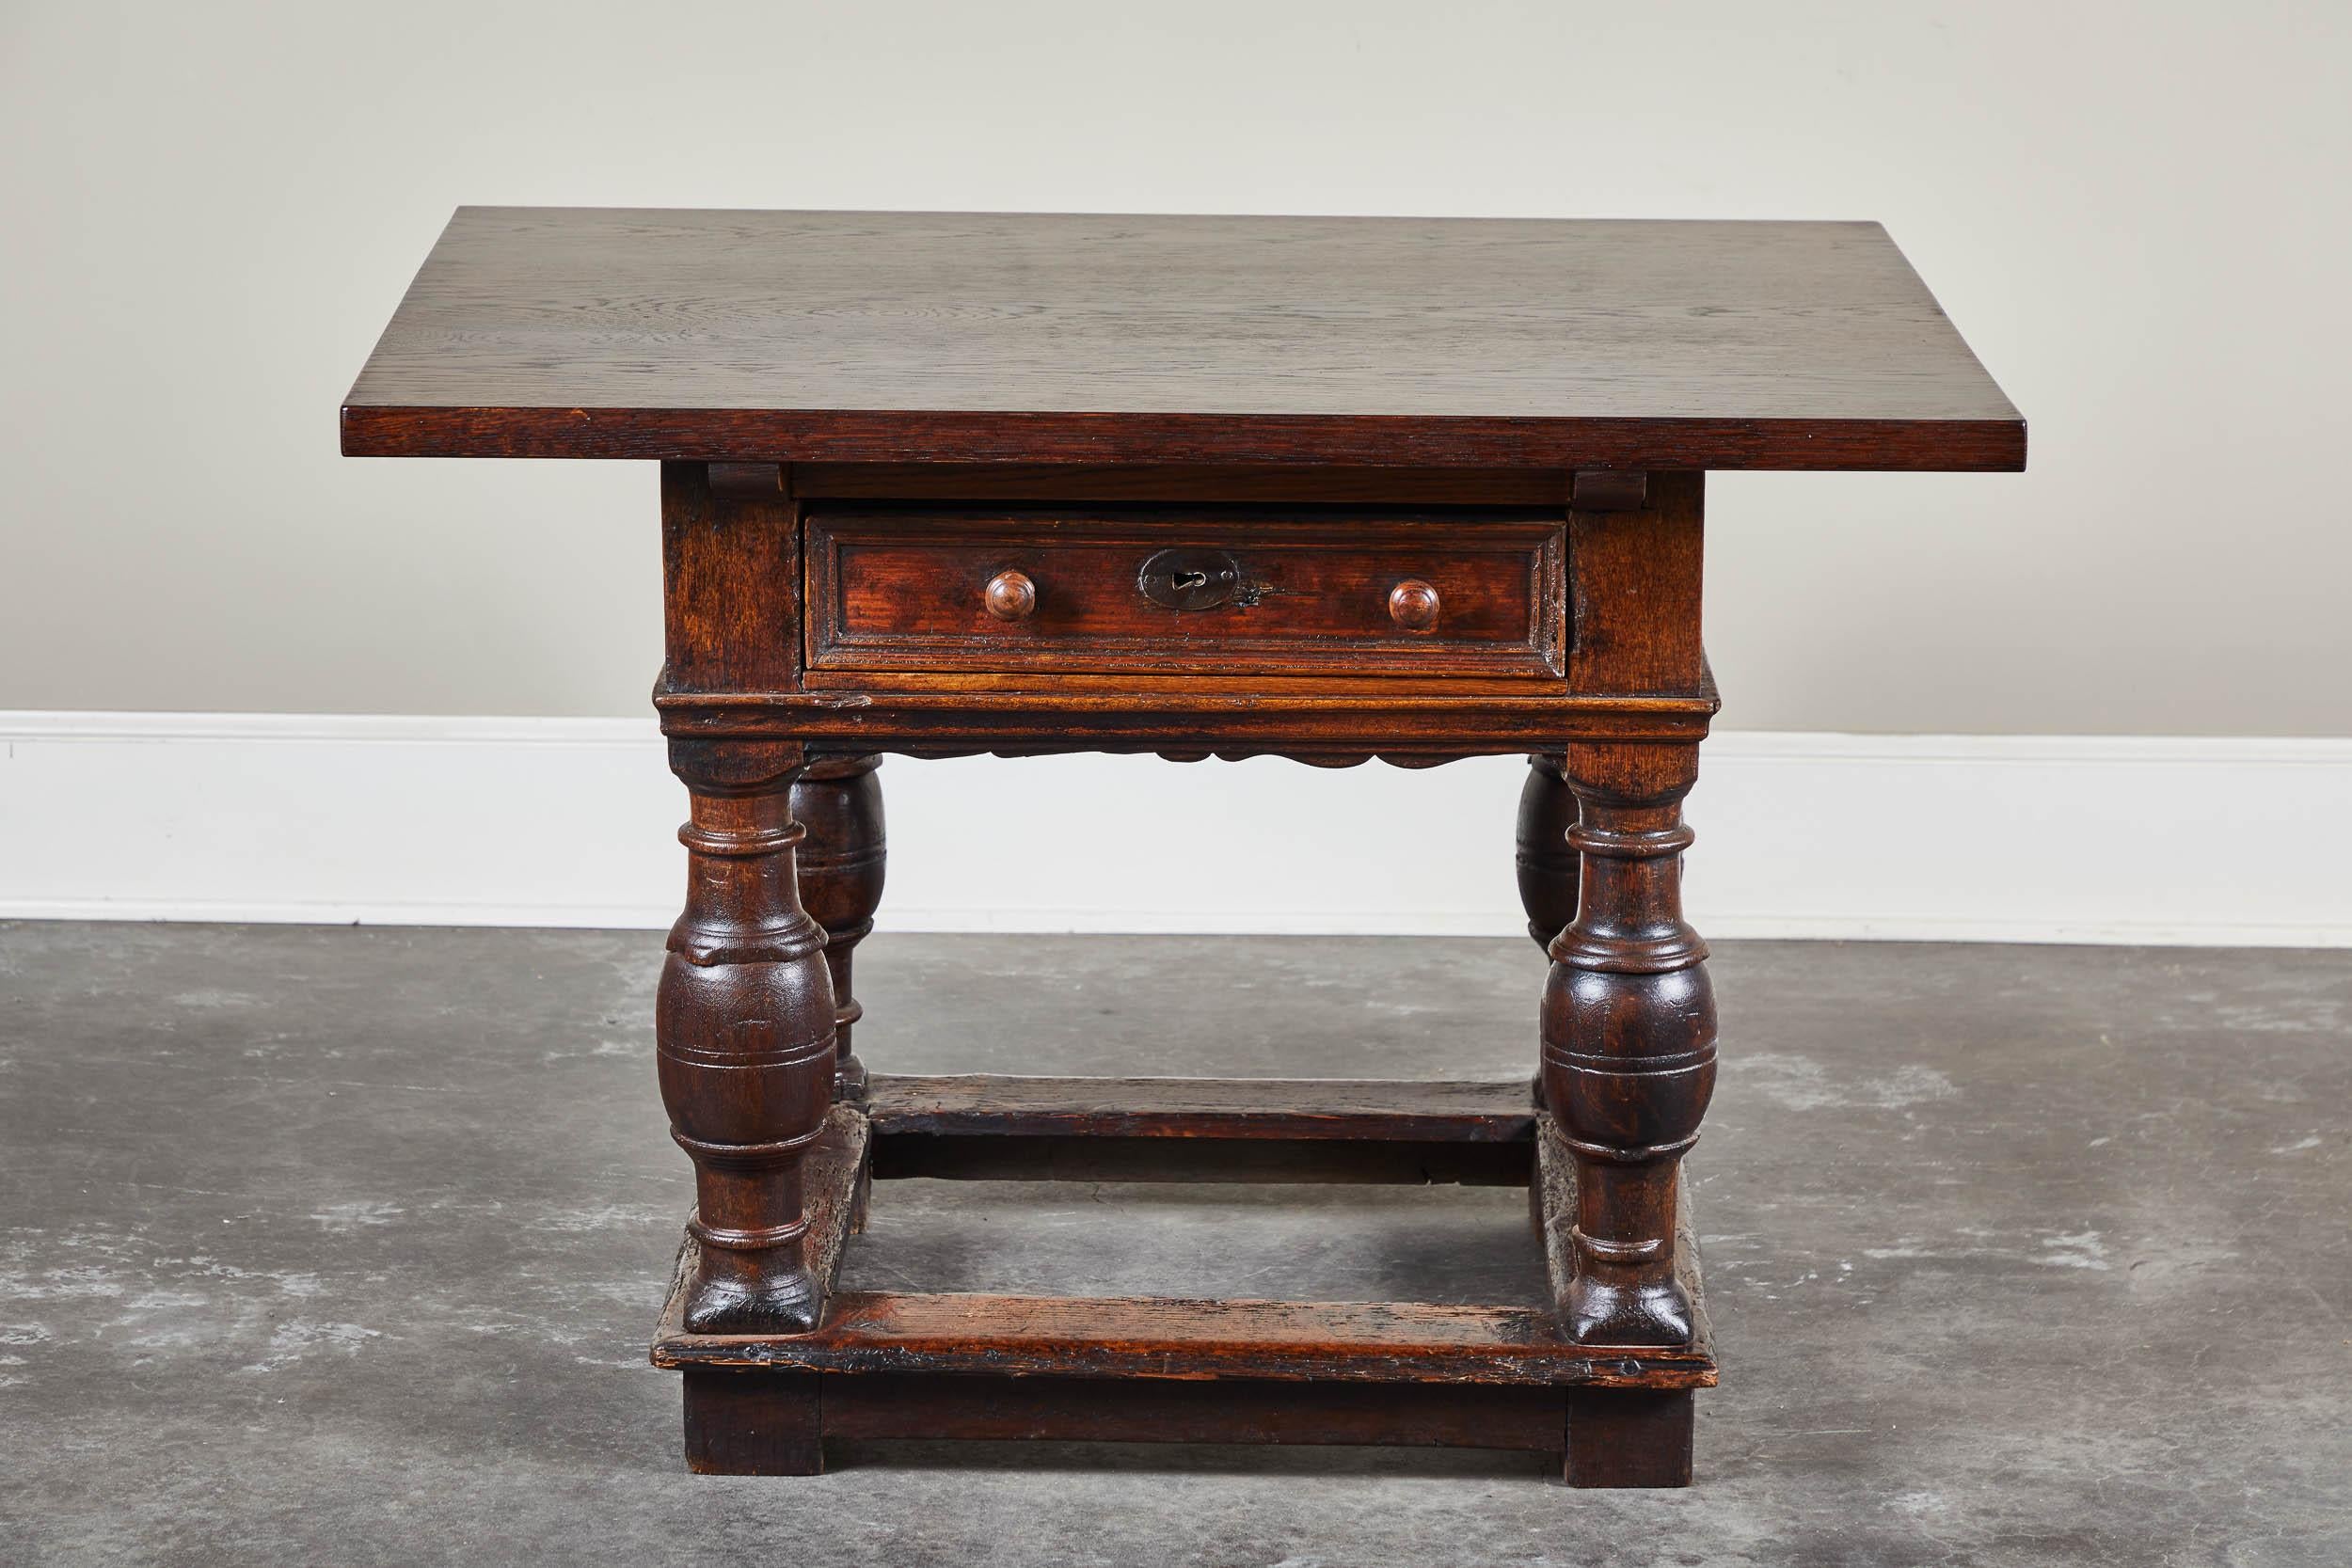 An 18th century Danish Baroque style table featuring one drawer with two handles and interesting turned legs. The table consists of a newer top.